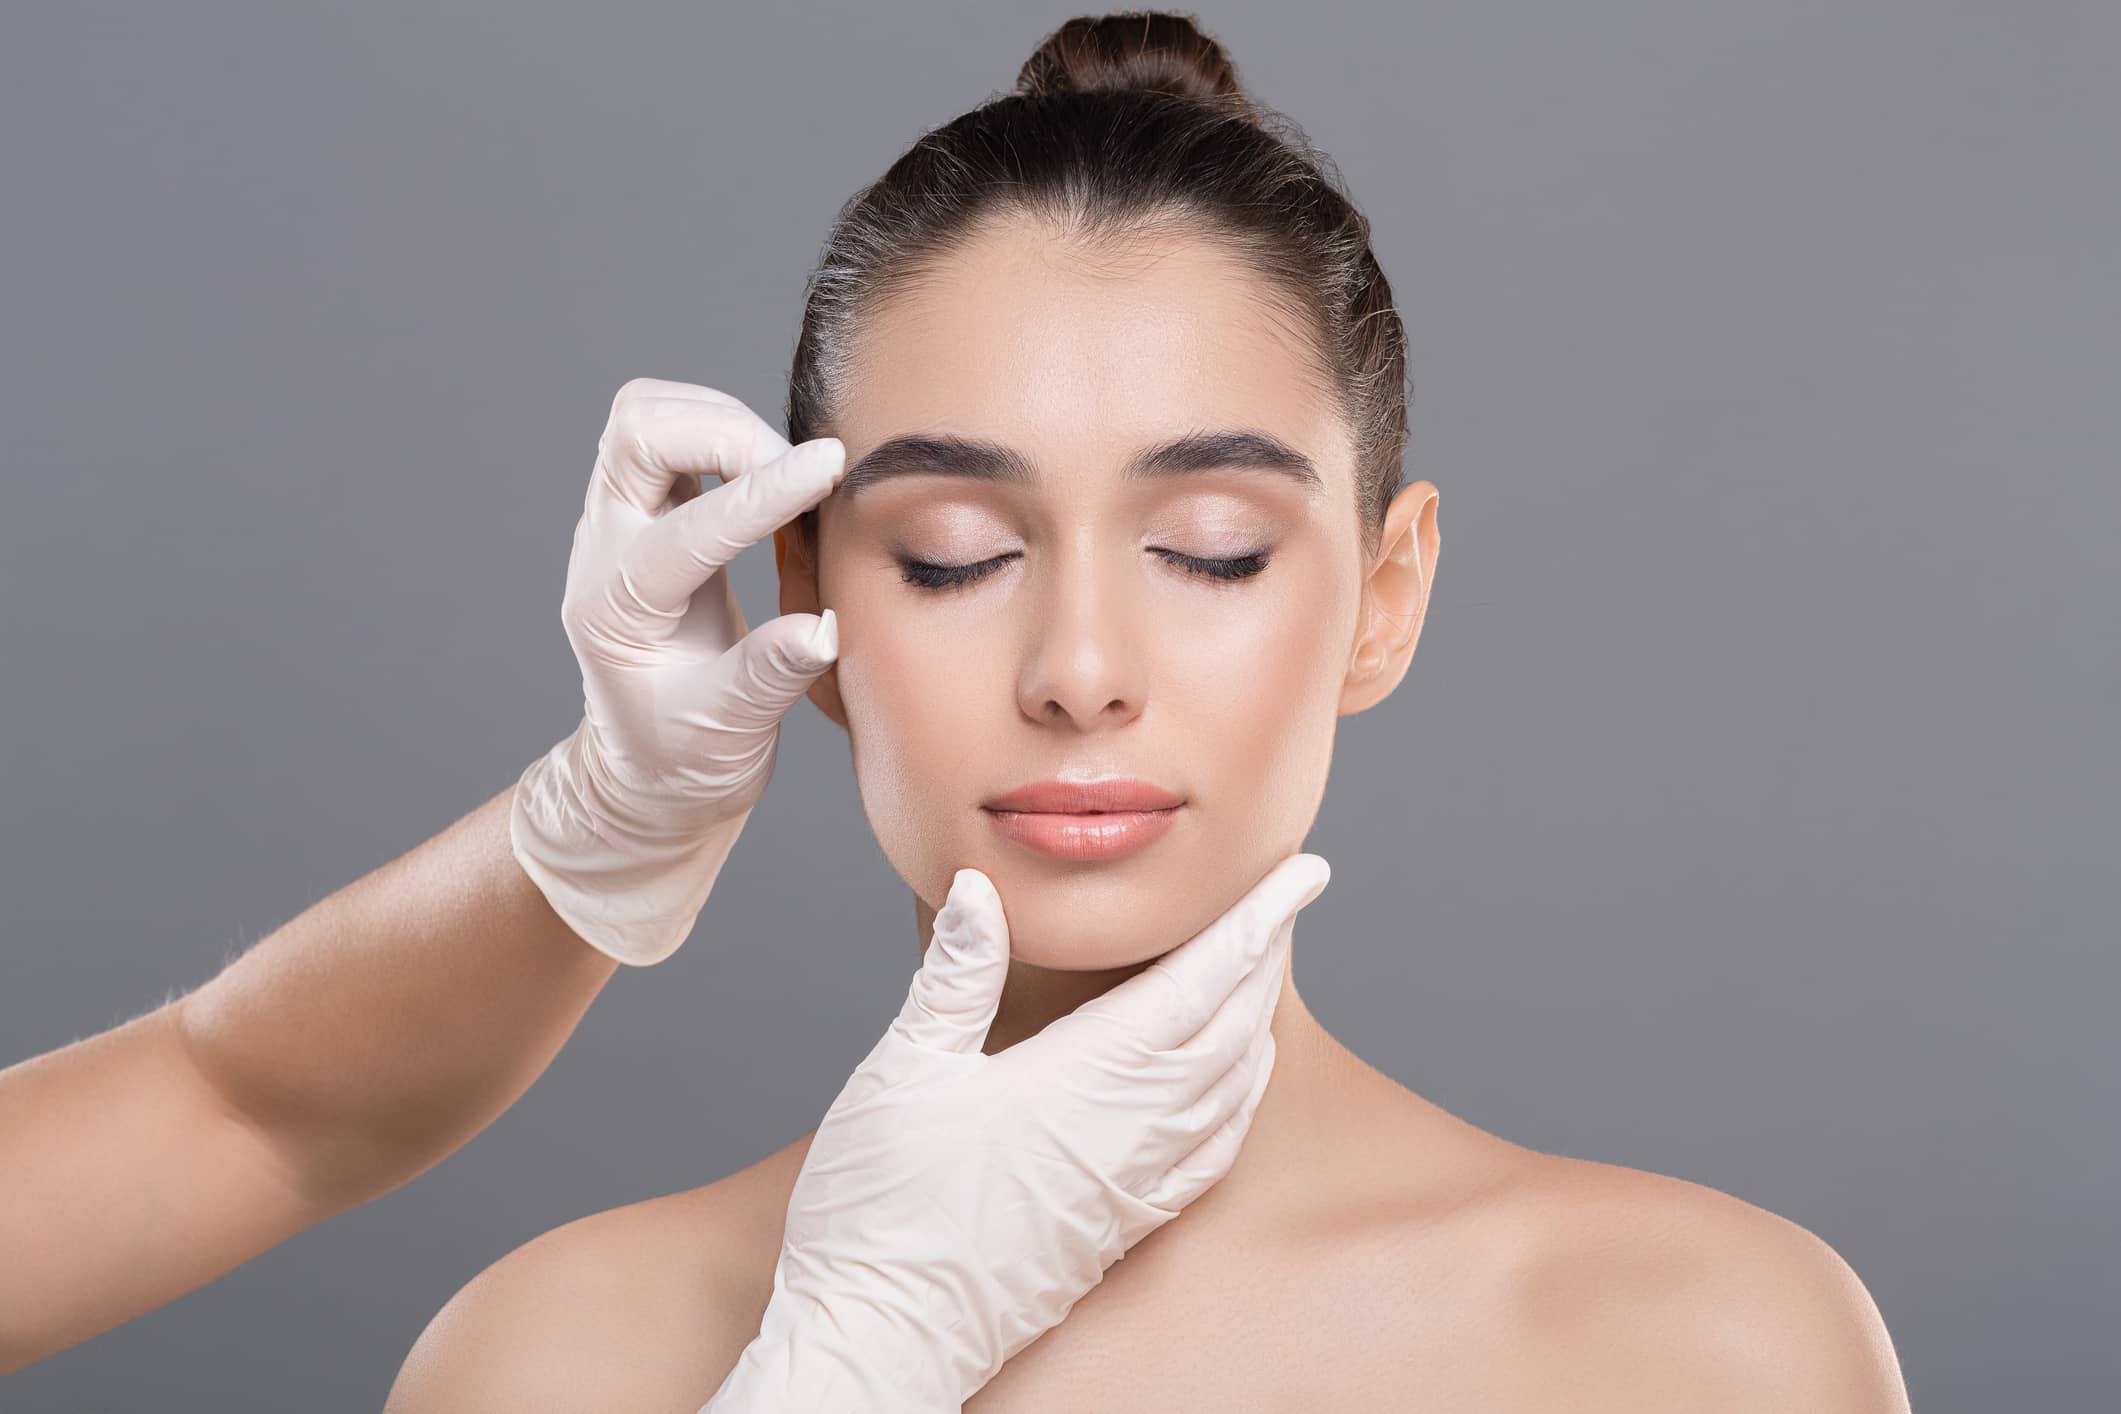 Image of a young woman getting cosmetic dermatology treatments on her face